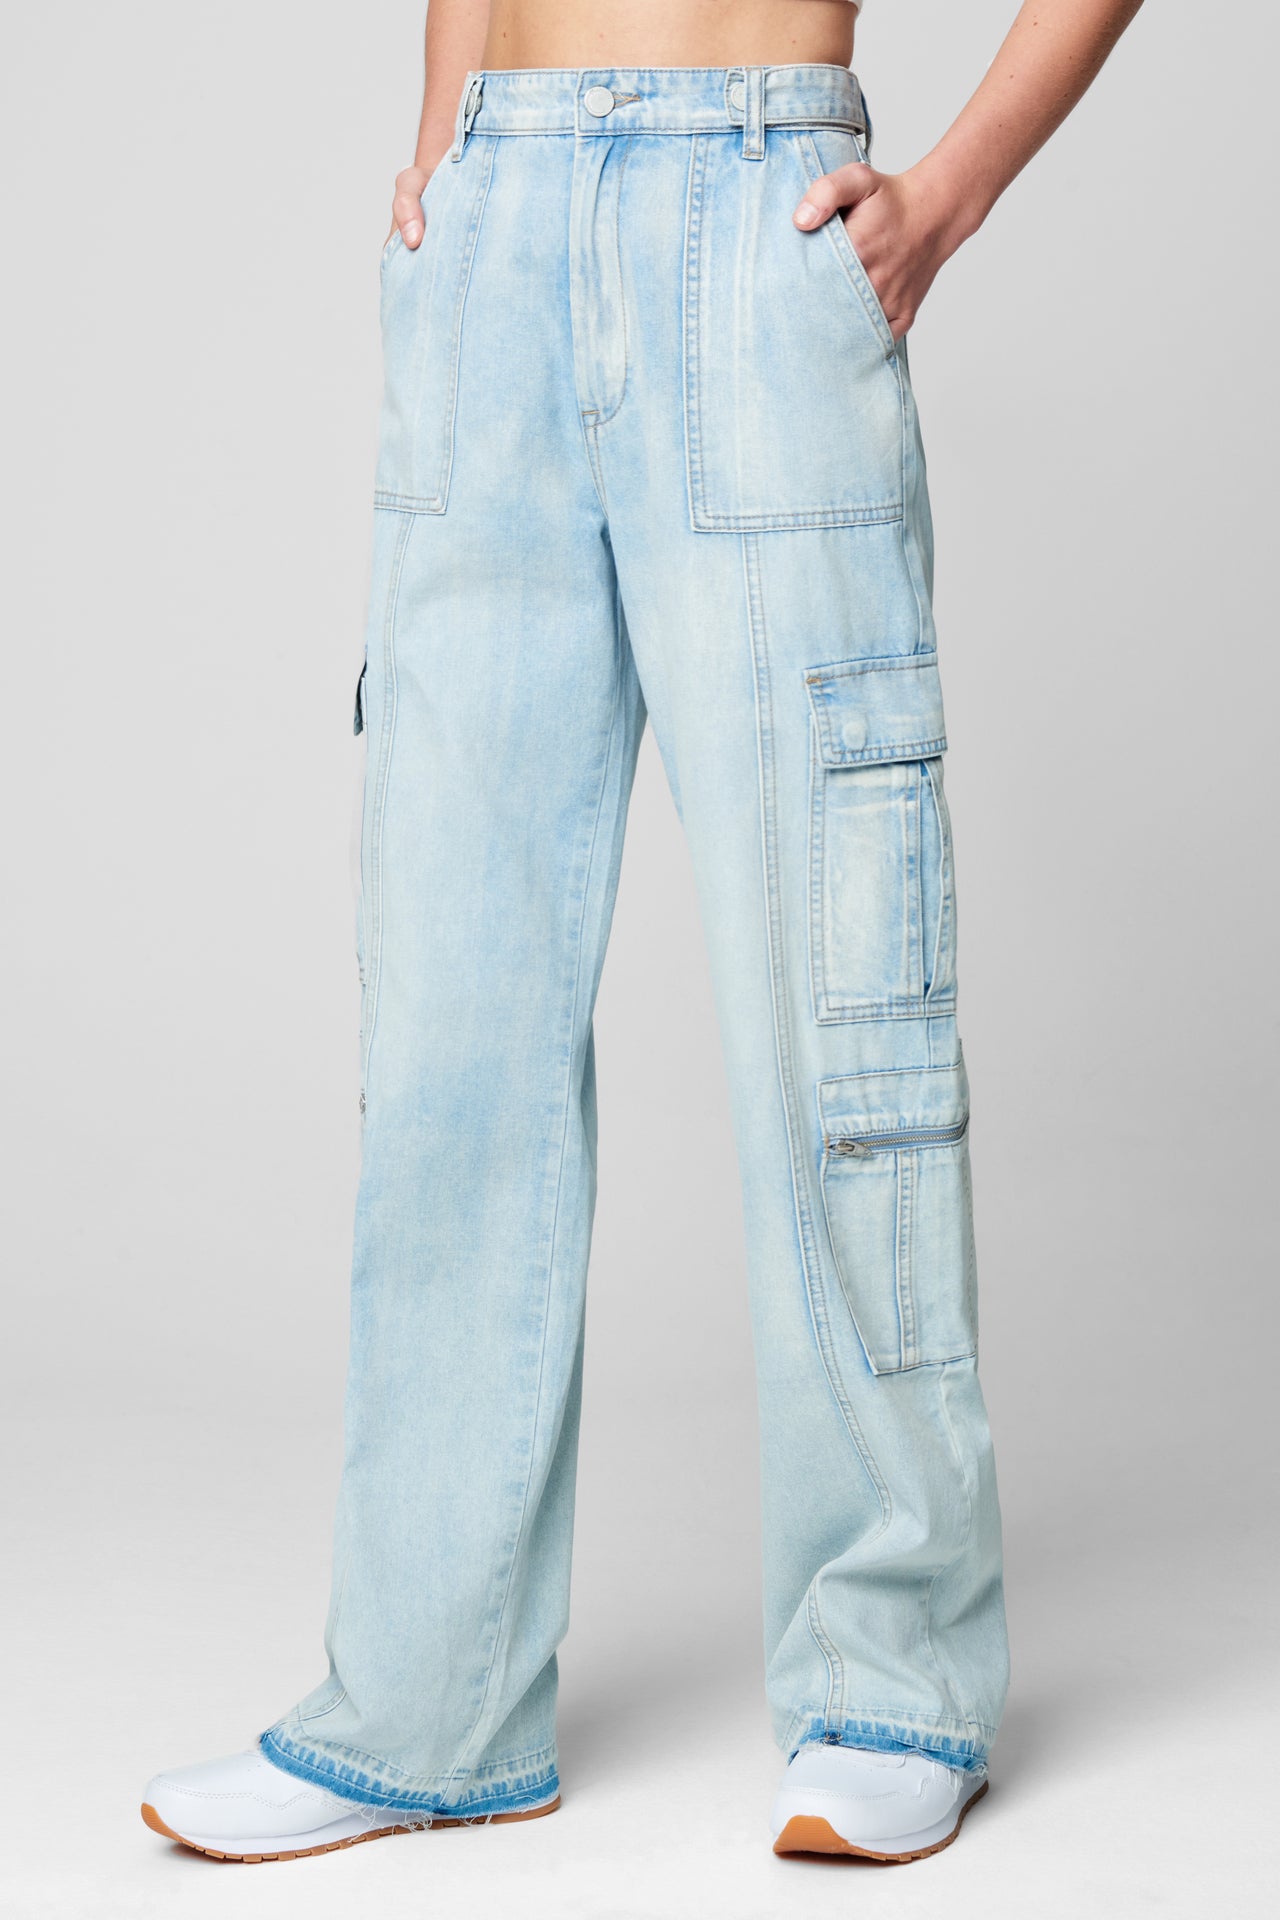 Call My Name Cargo Pants Blue | LIT Boutique